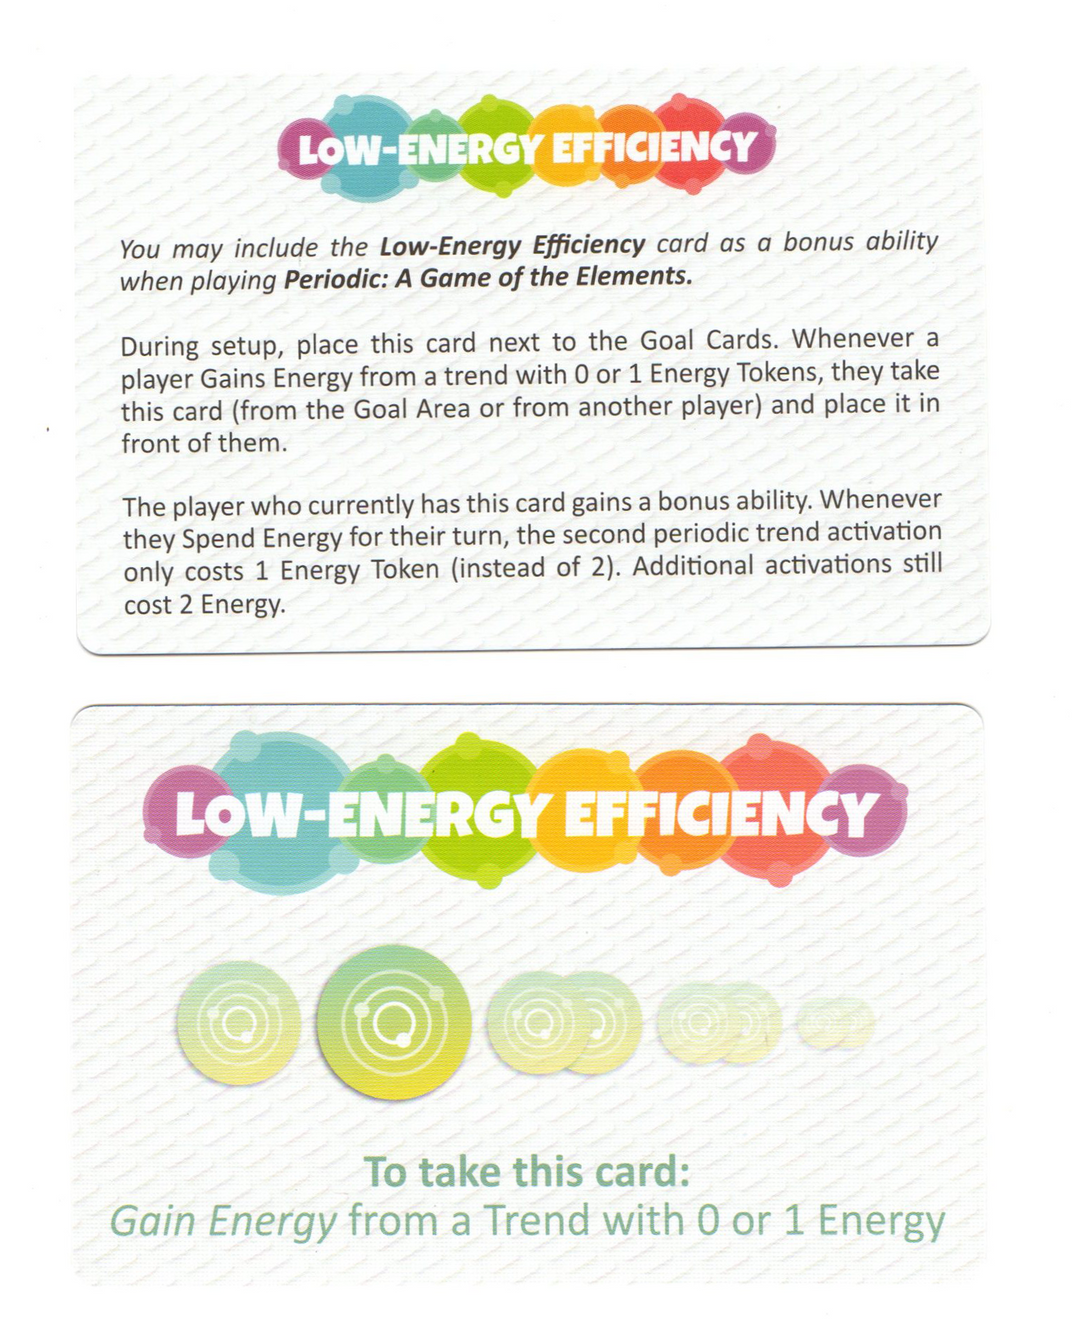 Periodic: Low-Energy Efficiency for use with the board game P, Periodic, Spring Sale, sold at the BoardGameGeek Store